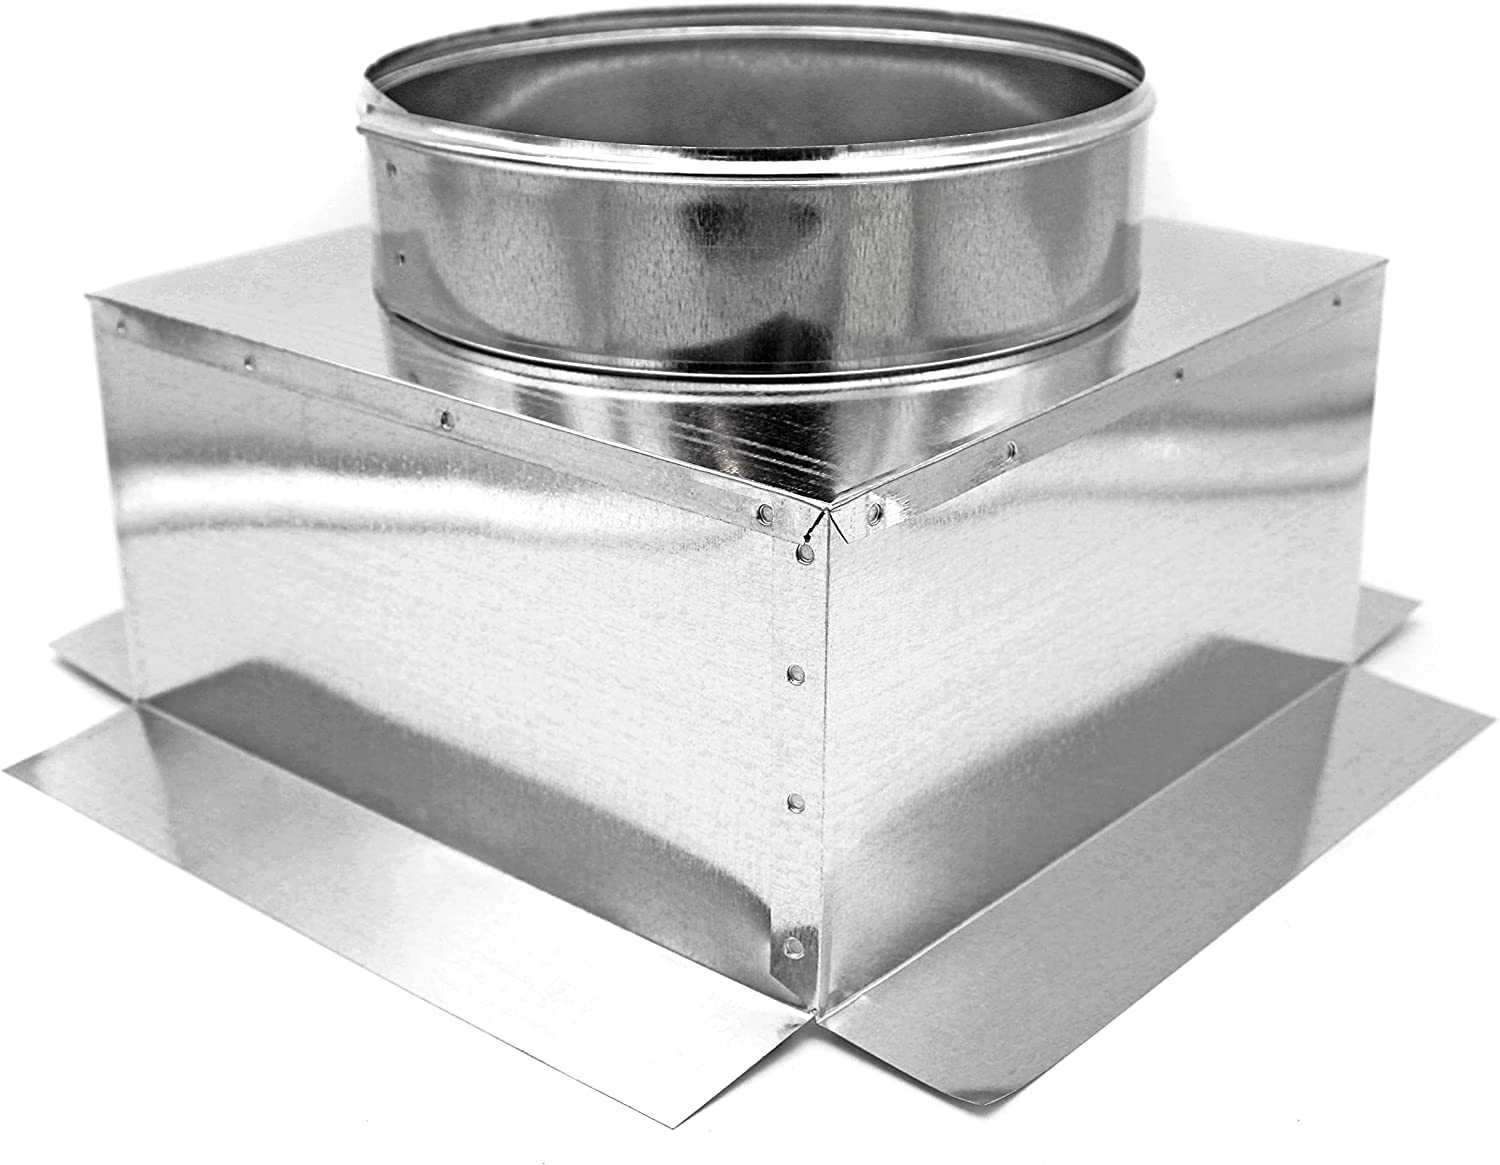 HVAC Plenum Ceiling Box | Top Ceiling Box | 12" X 12" X 12" Galvanized Steel Metal Ceiling Box is Compatible with Duct 12"